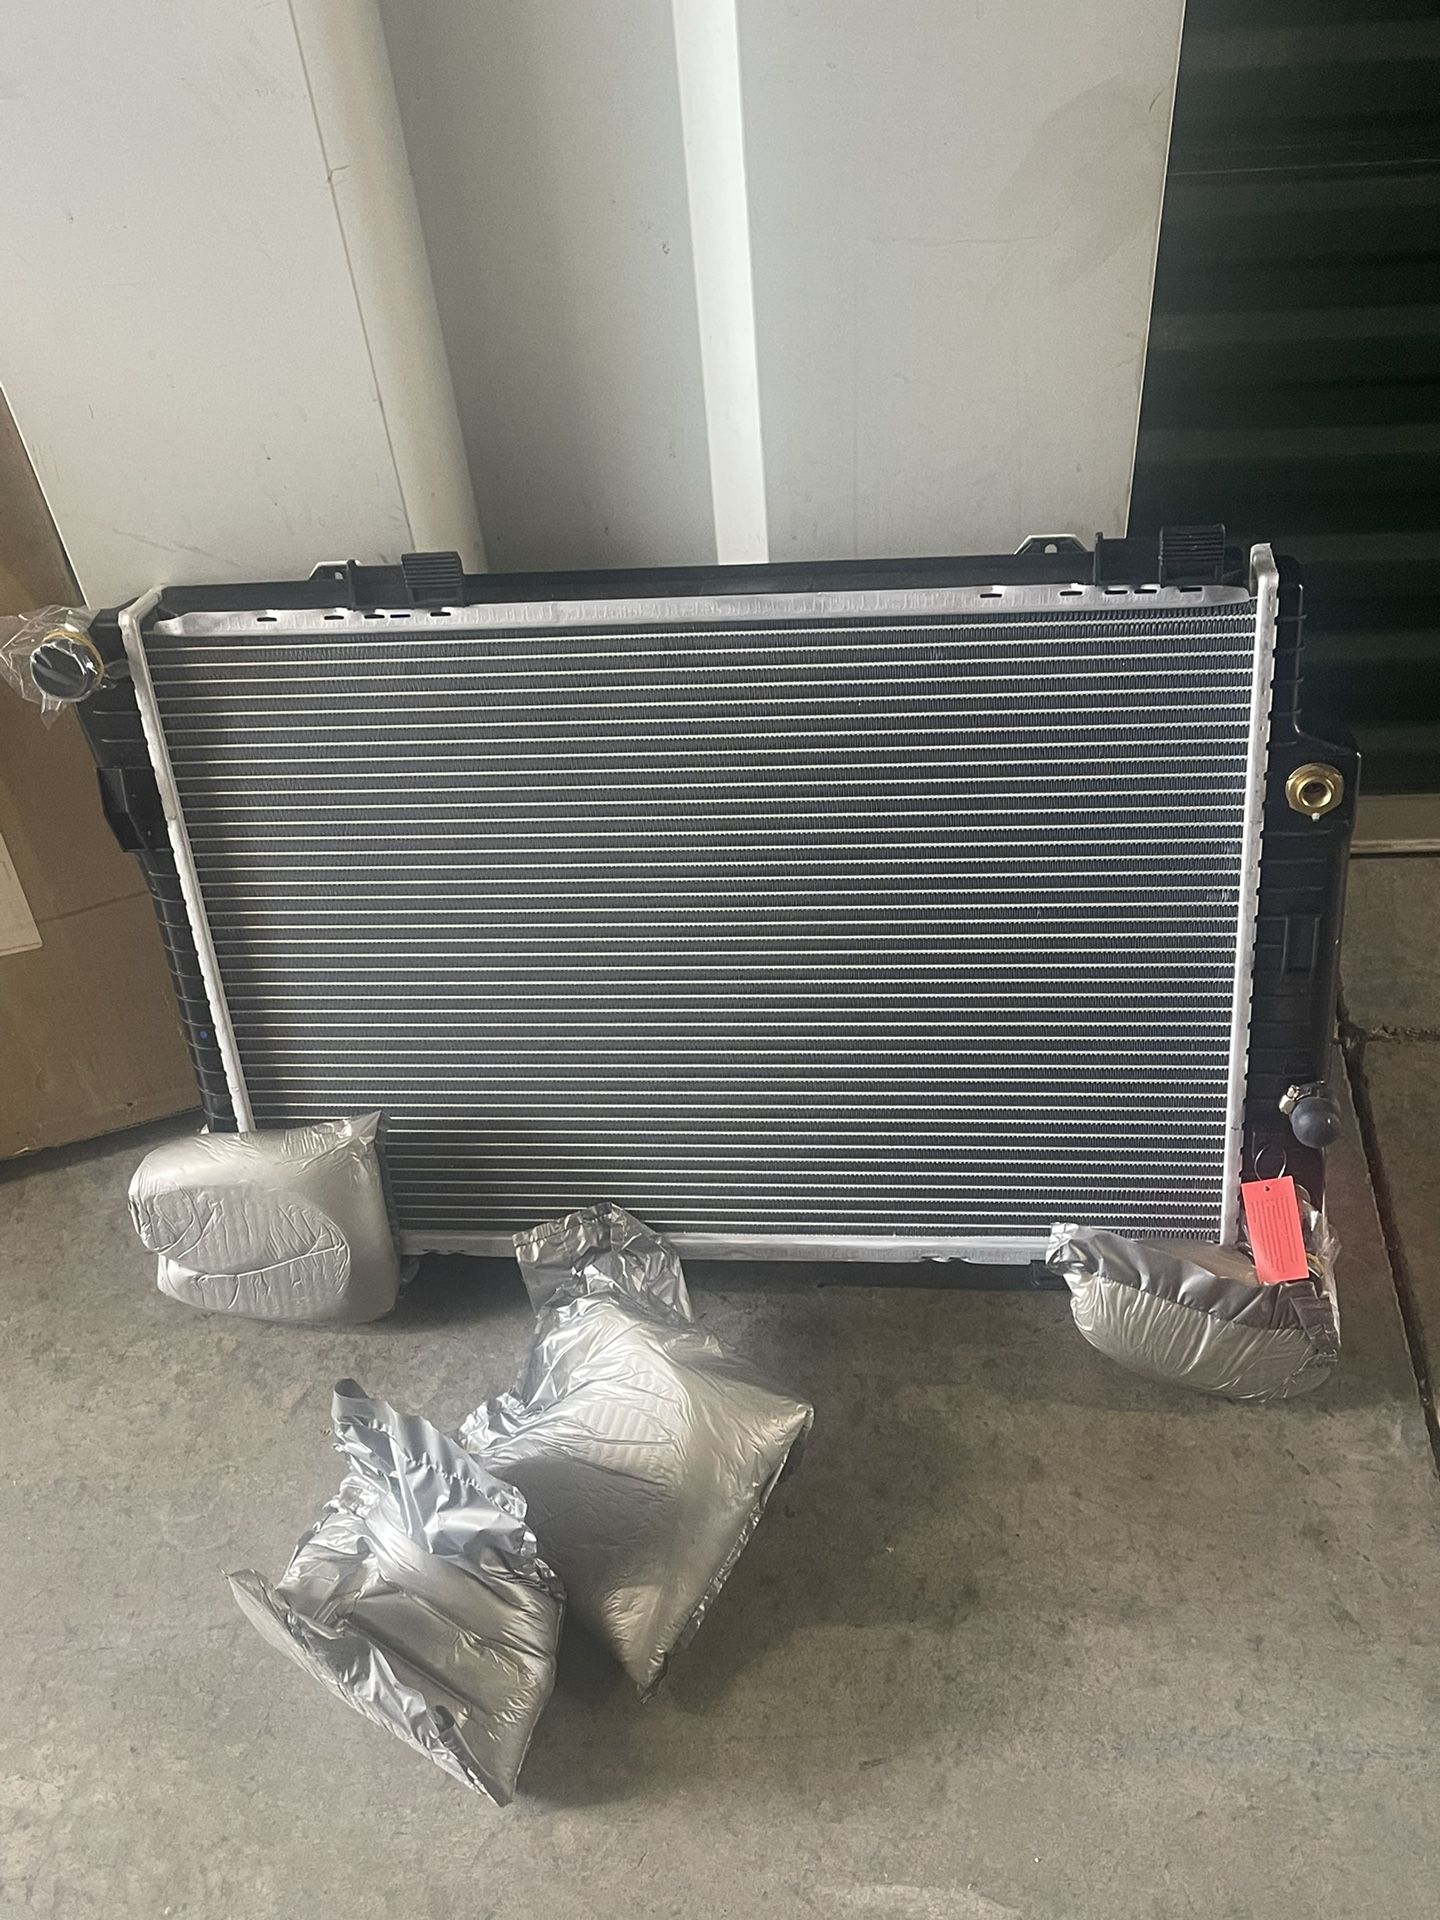 Replacement P1844 Radiator Mercedes Benz CLK(contact info removed) 2003